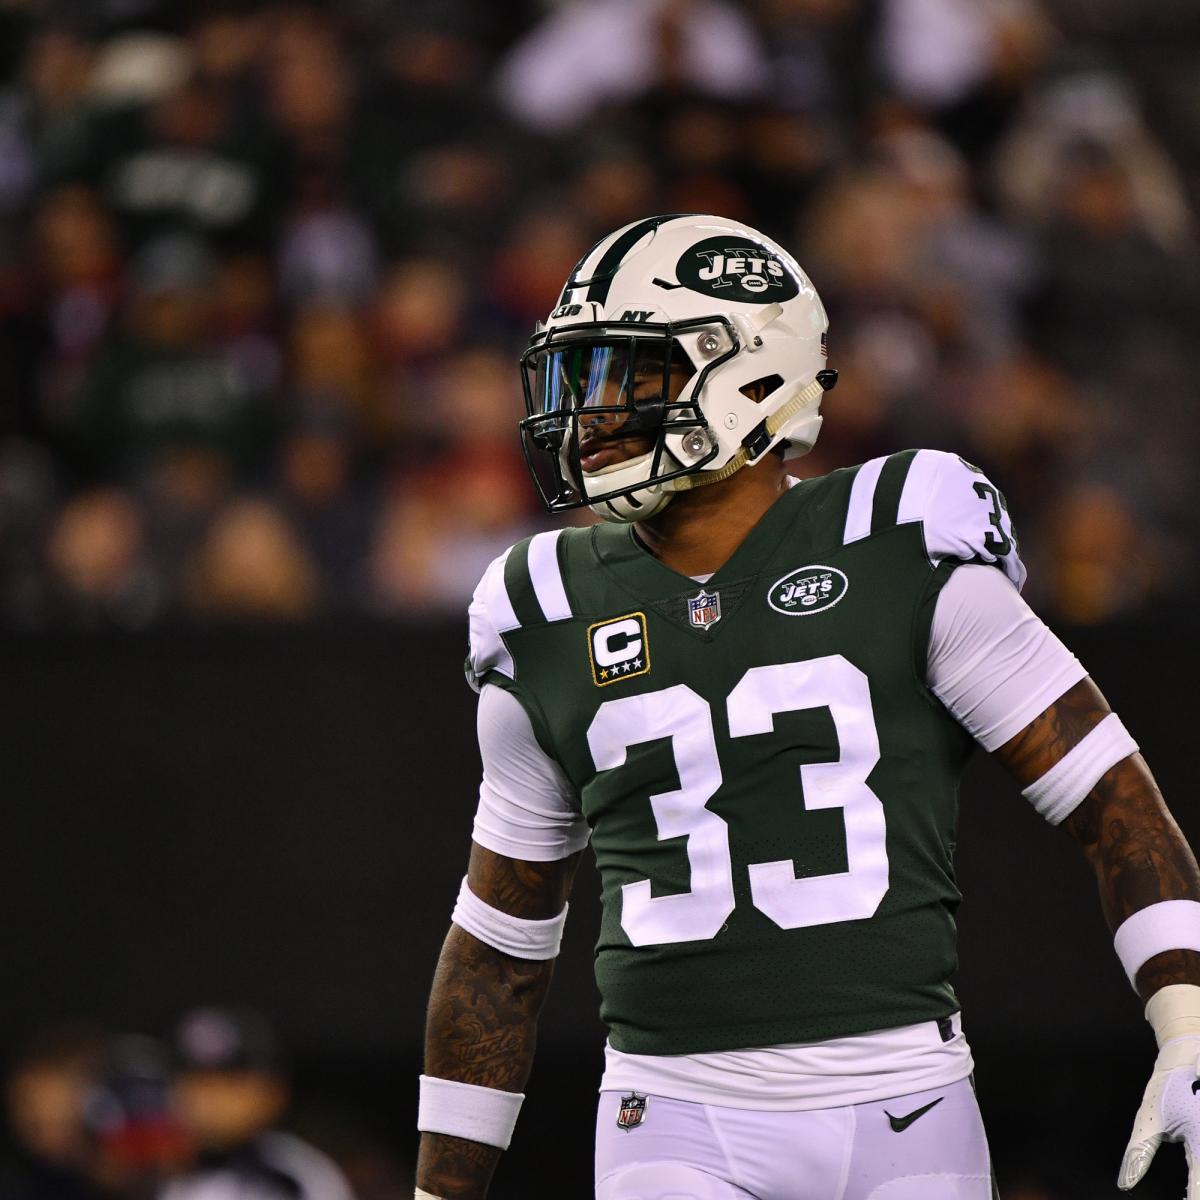 Jamal Adams on Jets Roster: Need More 'Dogs' to Be Contenders | Bleacher Report ...